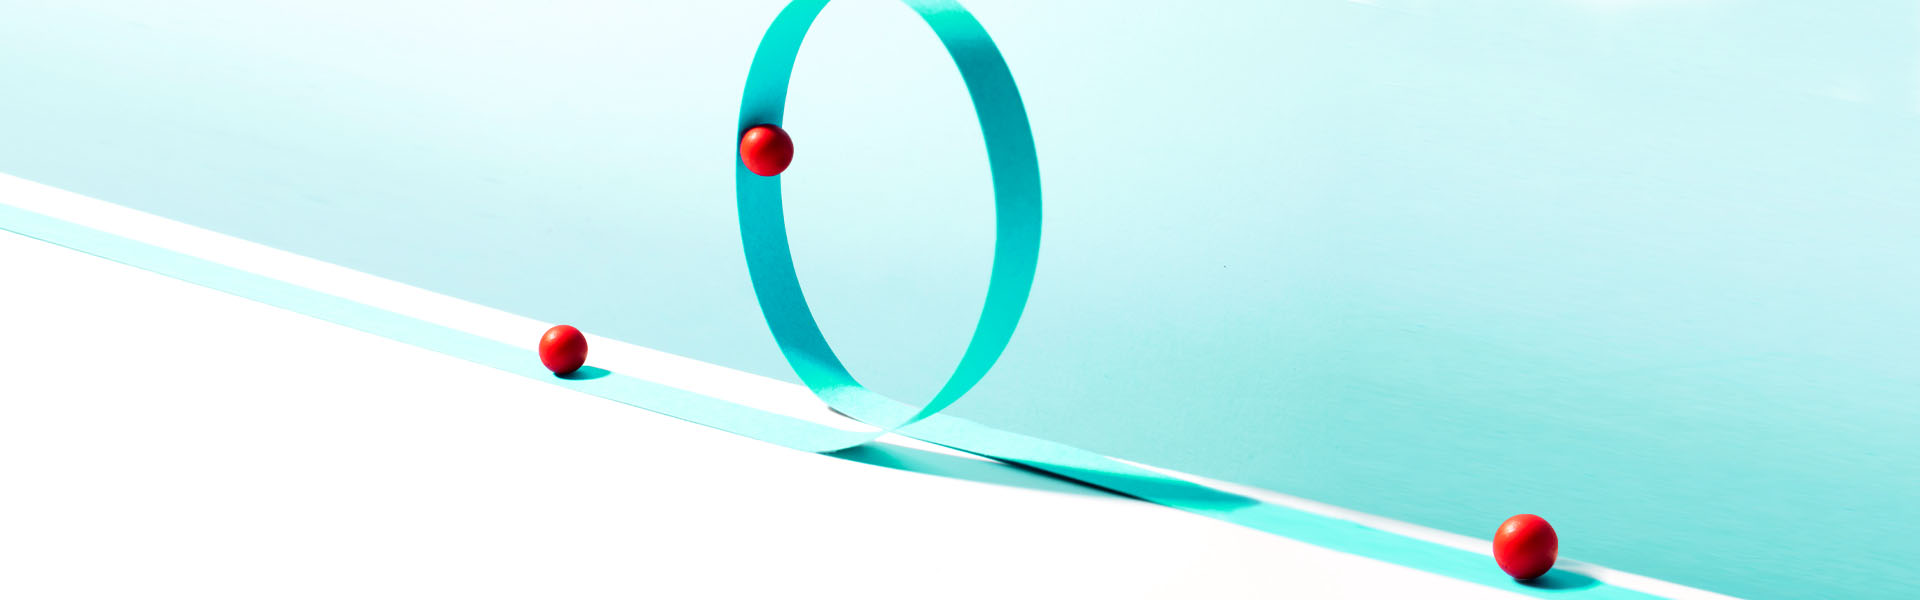 Abstract illustration of red dots traveling on aqua ribbon.